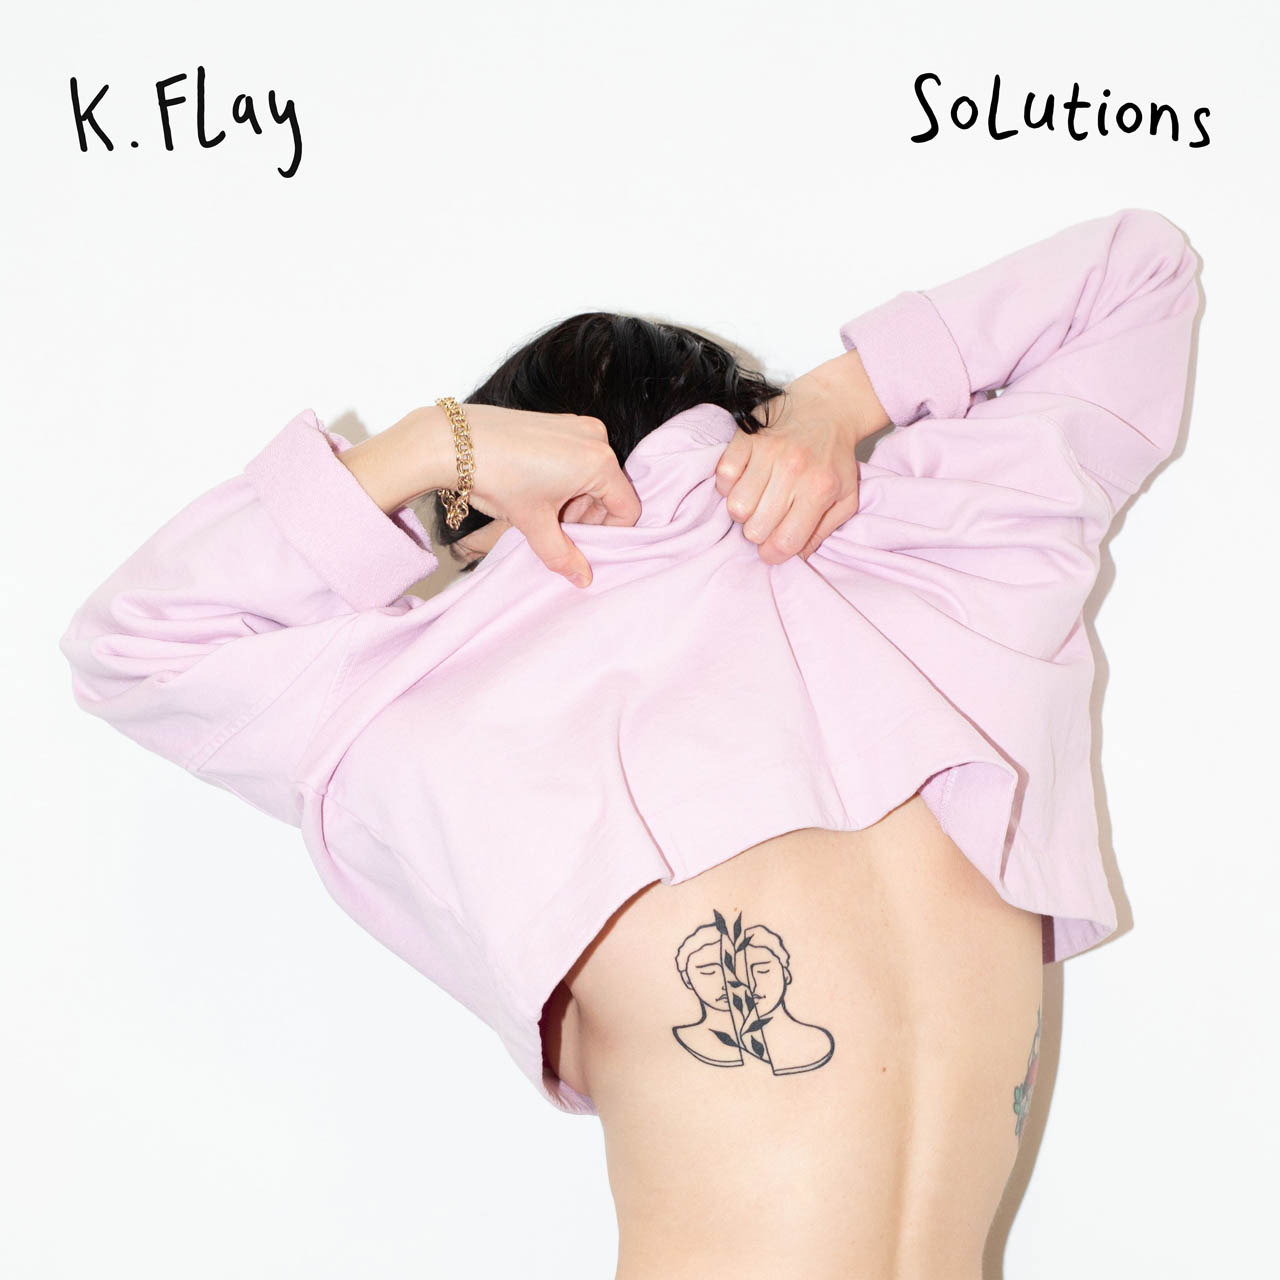 K.Flay Solutions